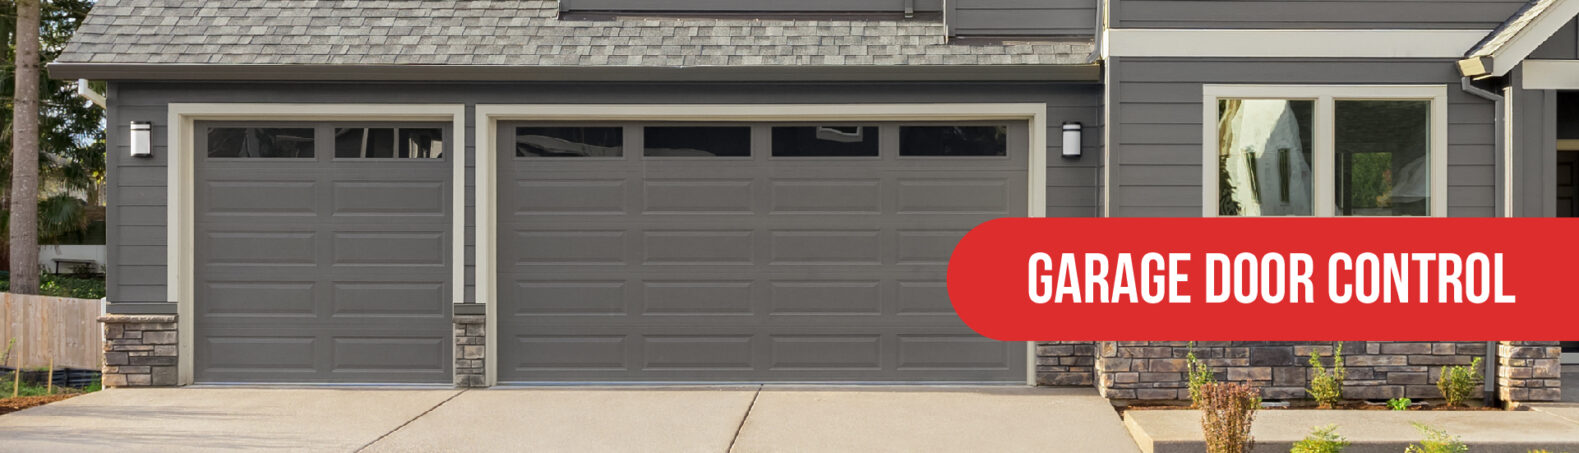 Garage doors are an easy way for a criminal to enter a house so get a smart garage door control to better protect your home.